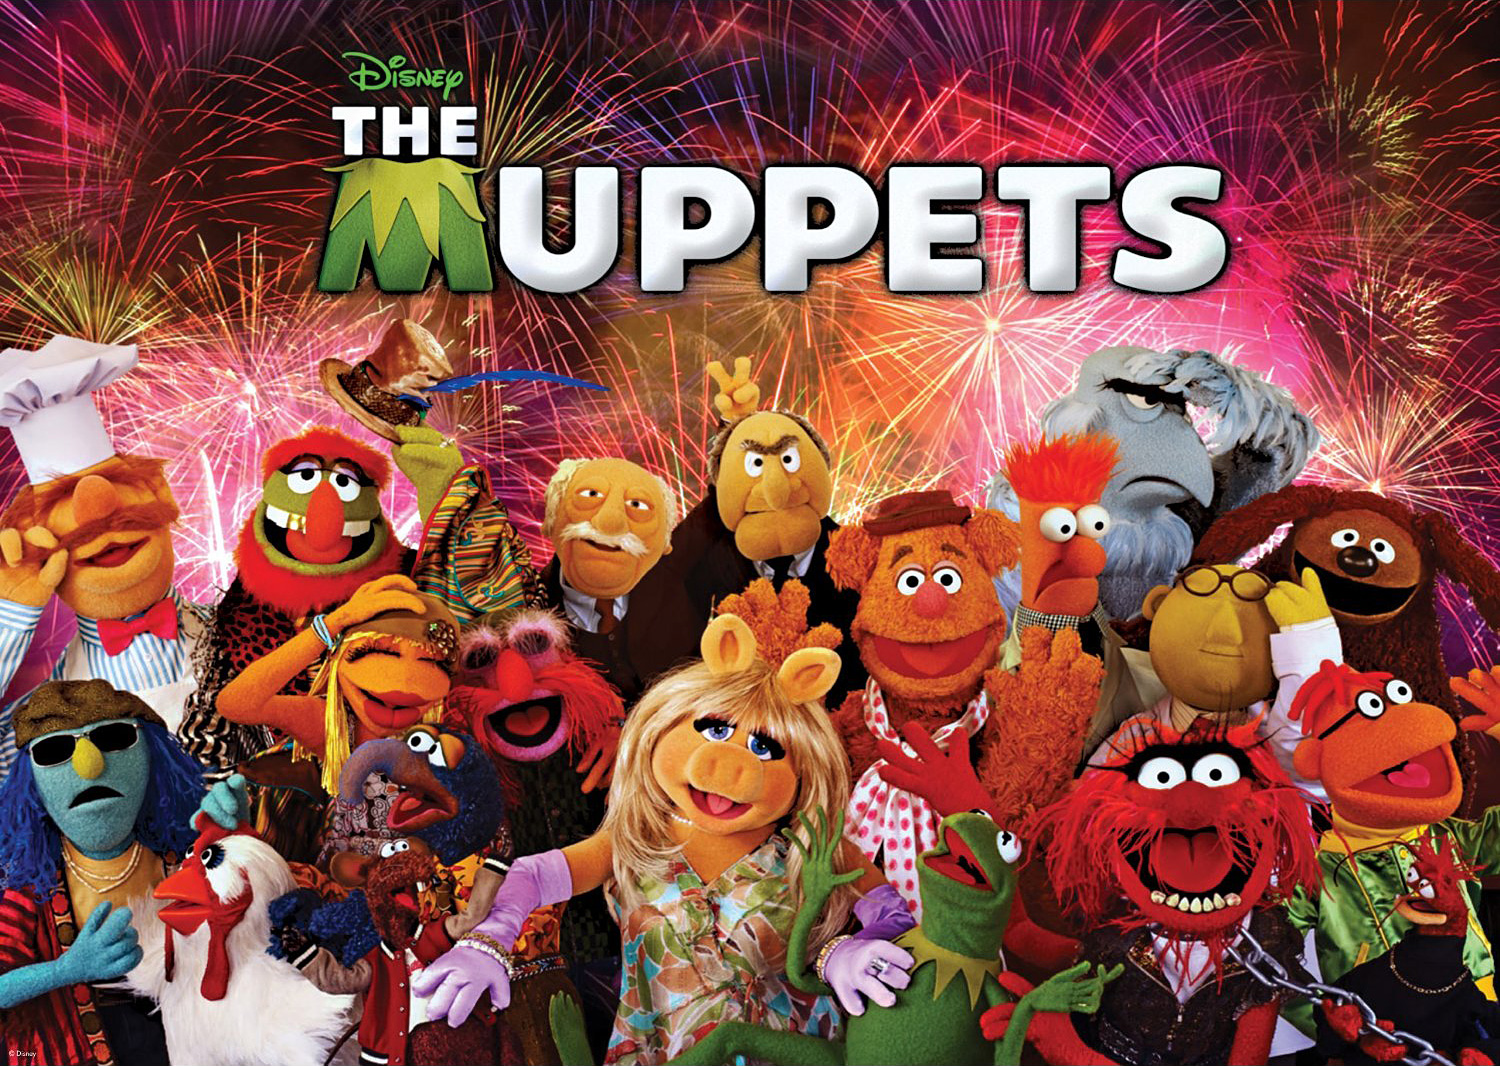 The Muppets #2